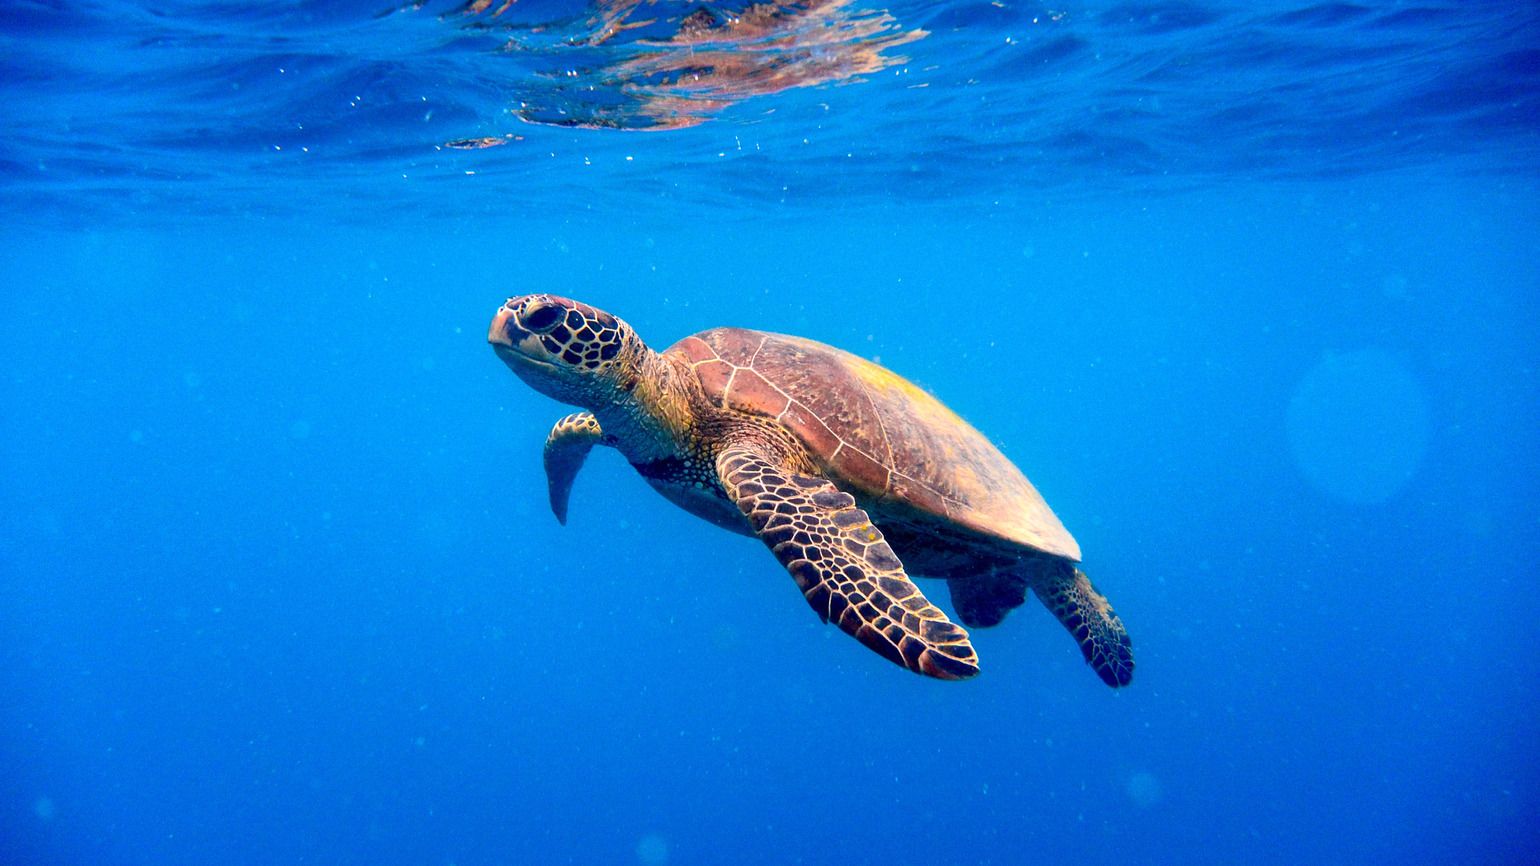 A sea turtle is an example of creation by God's hands